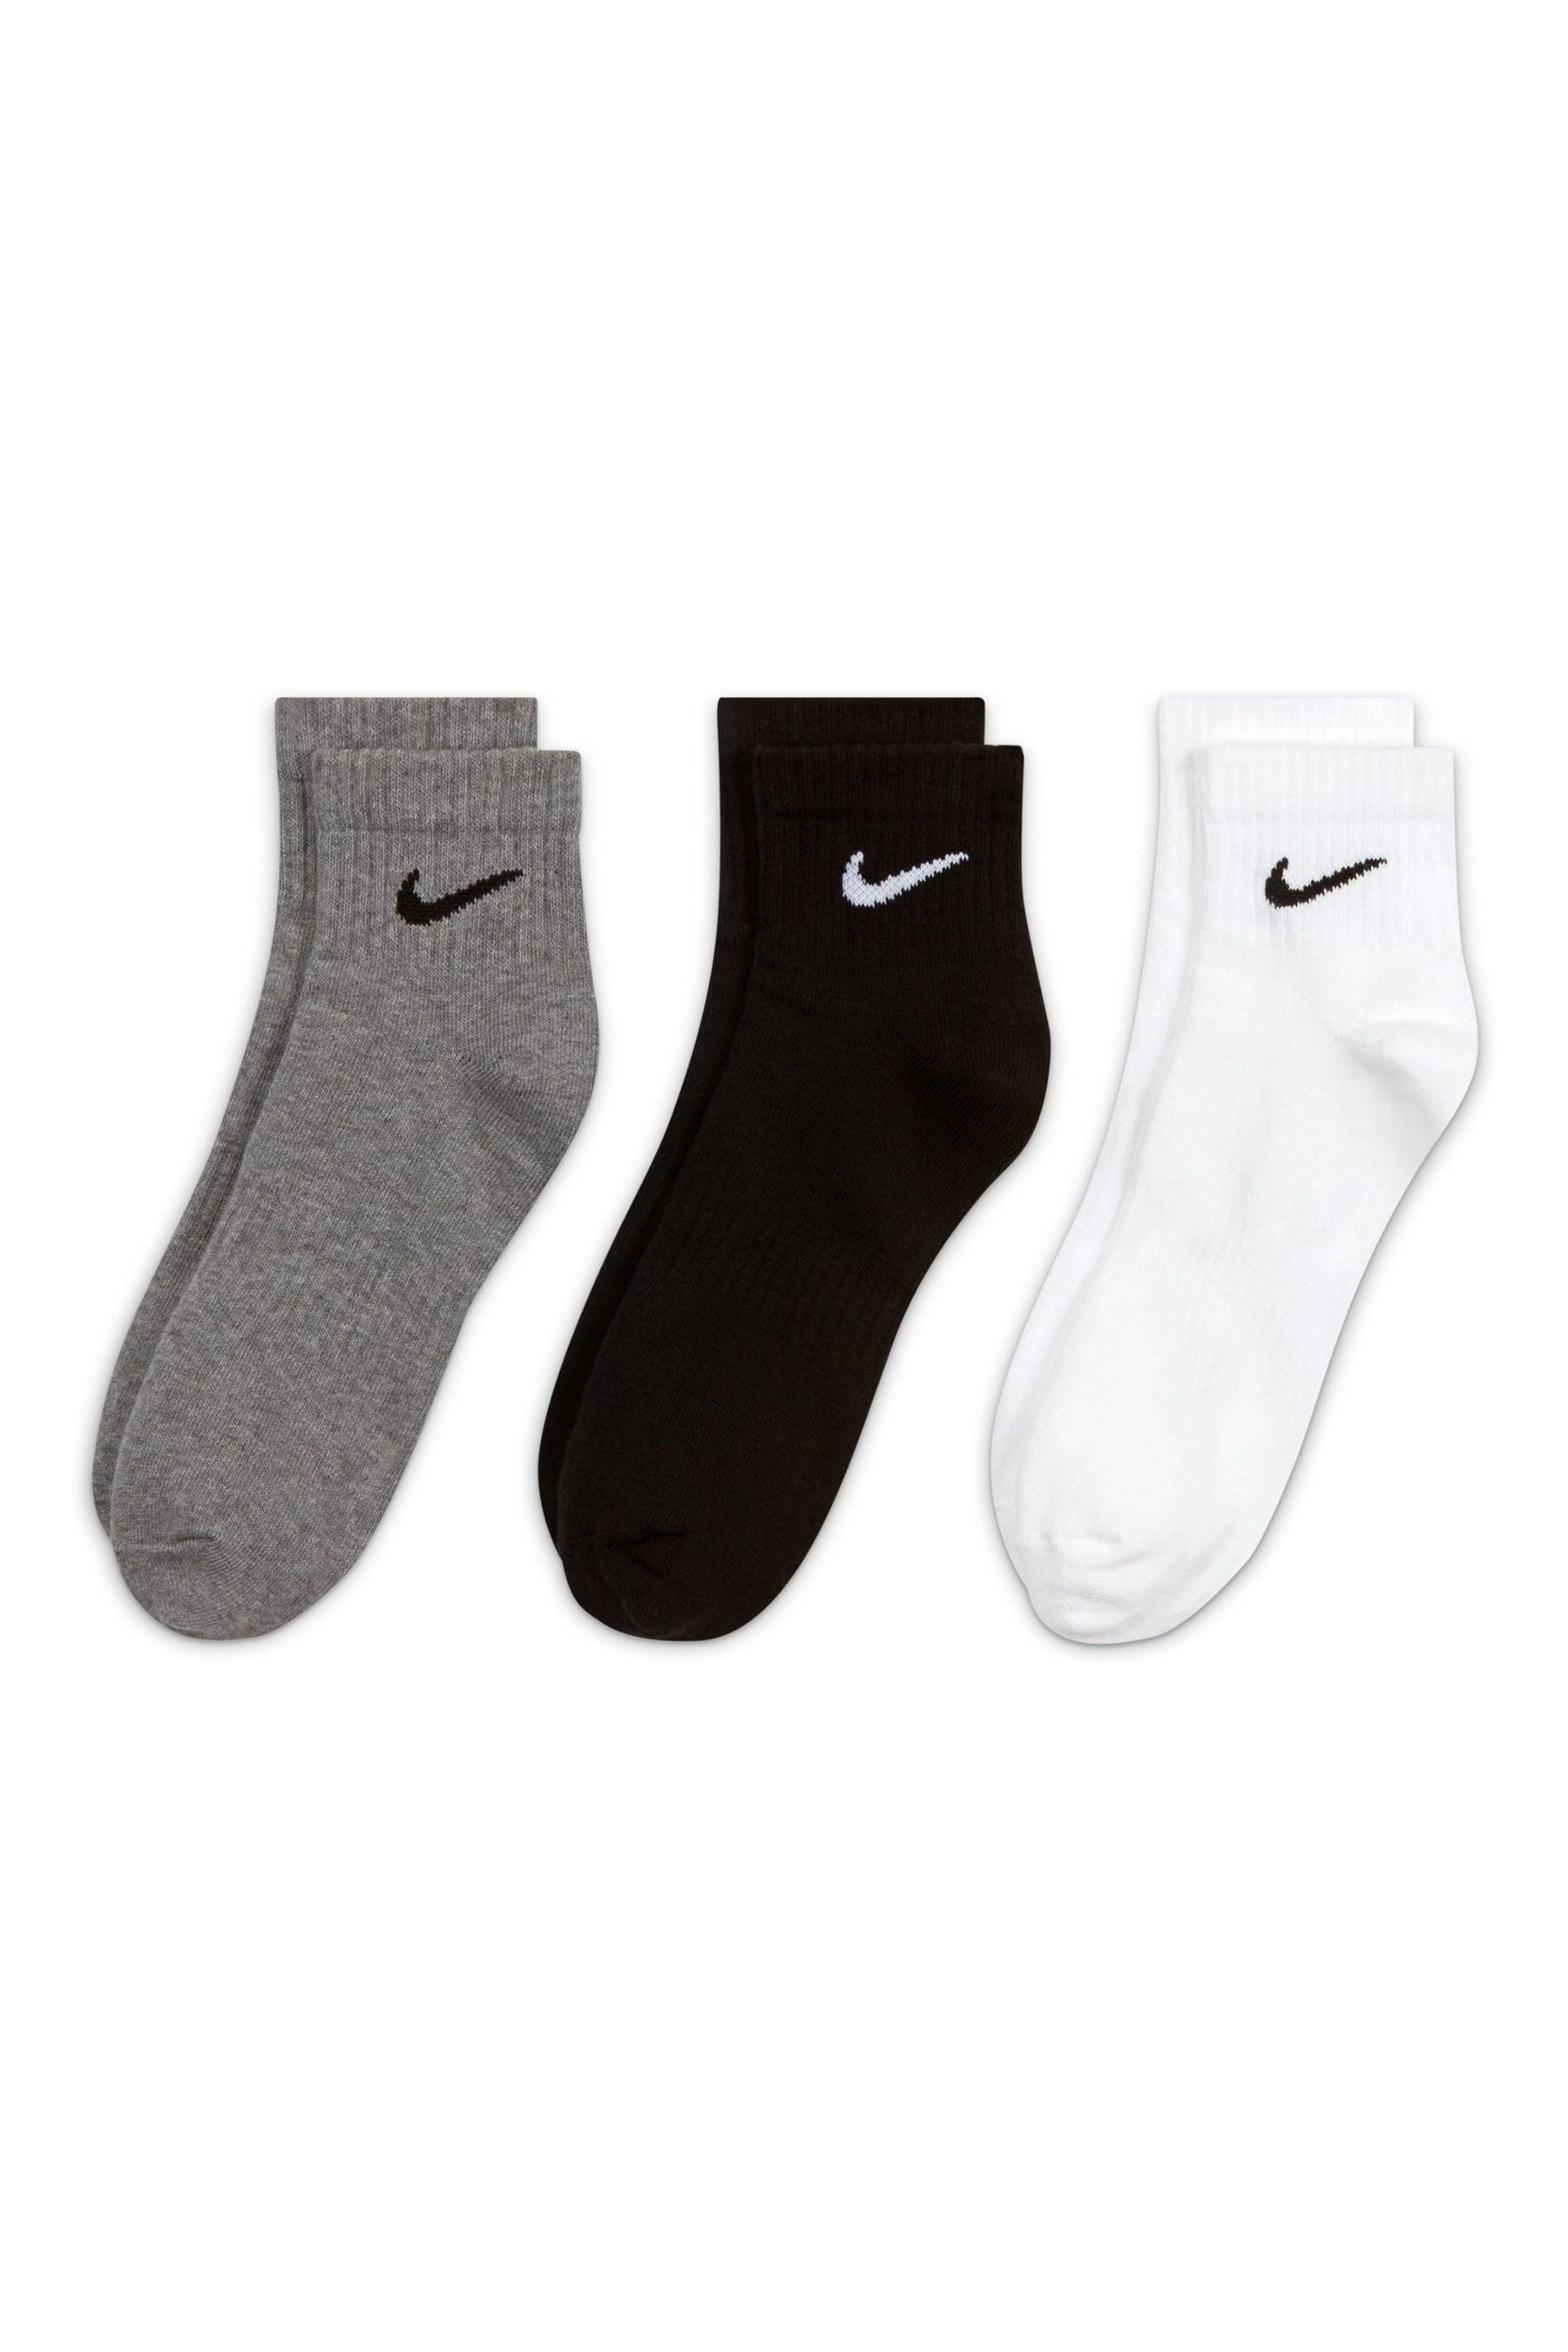 Buy Nike White/Black Lightweight Cushioned Ankle Socks 3pk from the ...